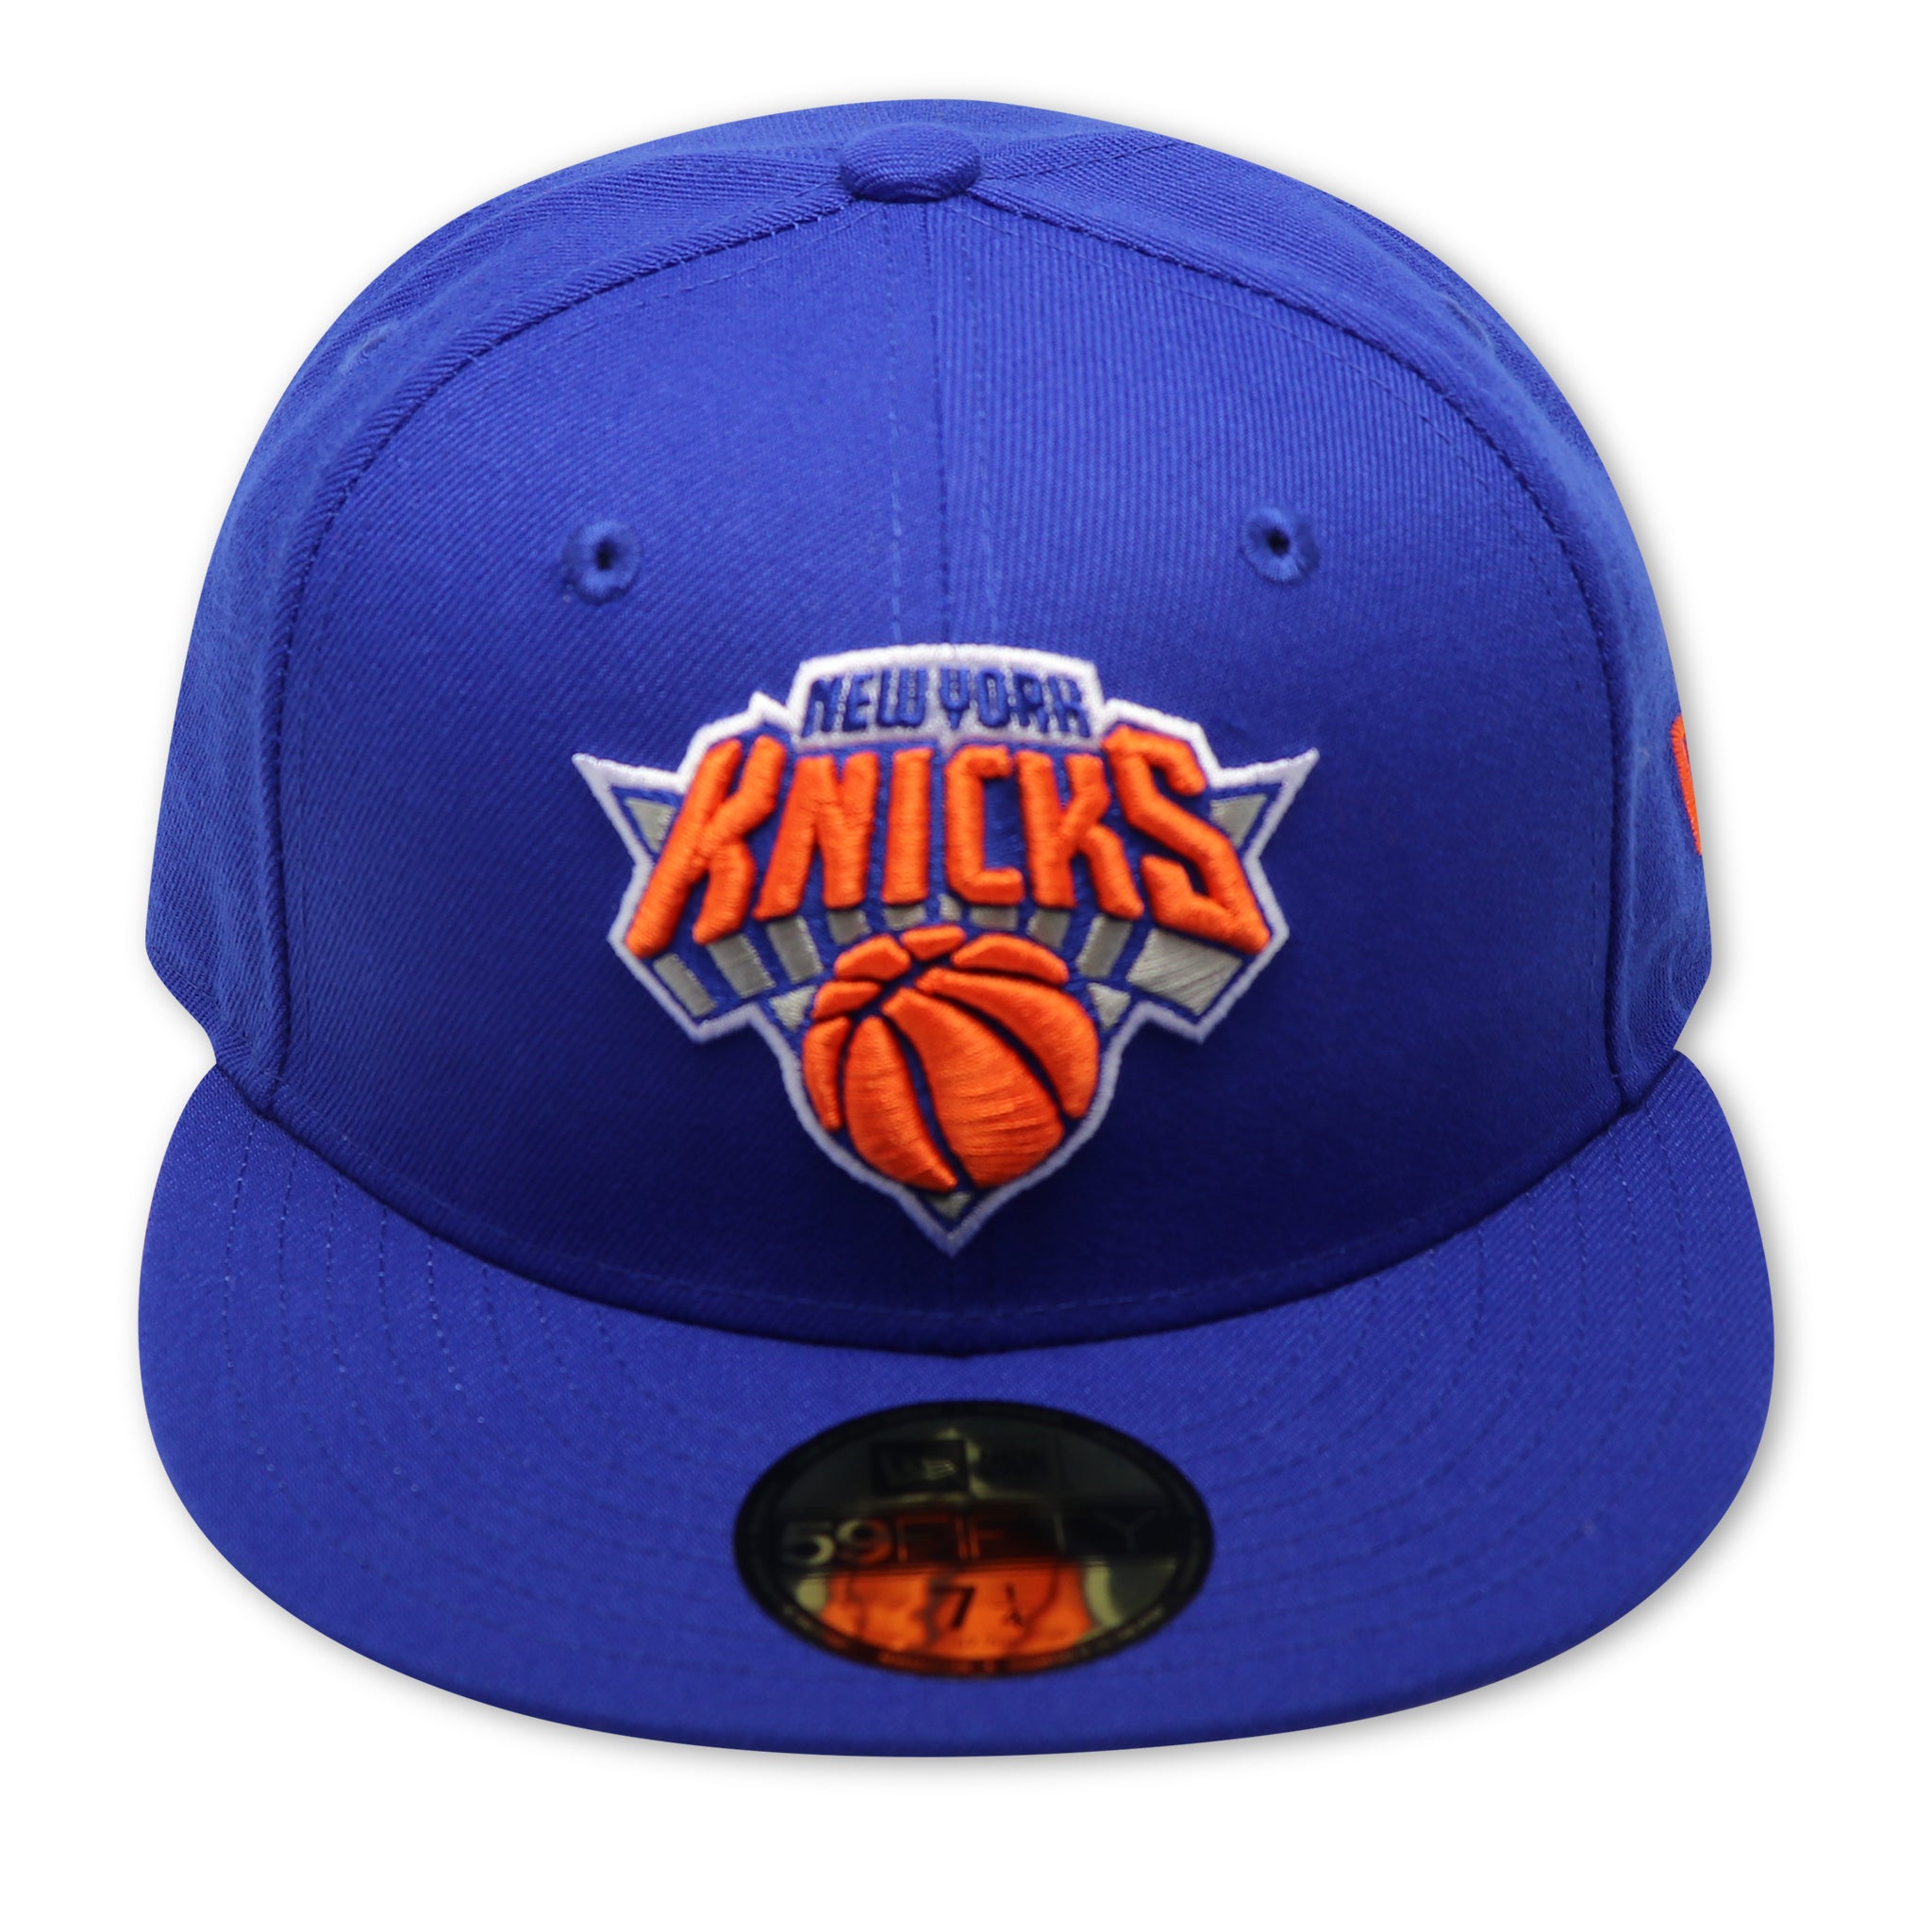 NEW YORK KNICKS (ROYAL) NEW ERA 59FIFTY FITTED